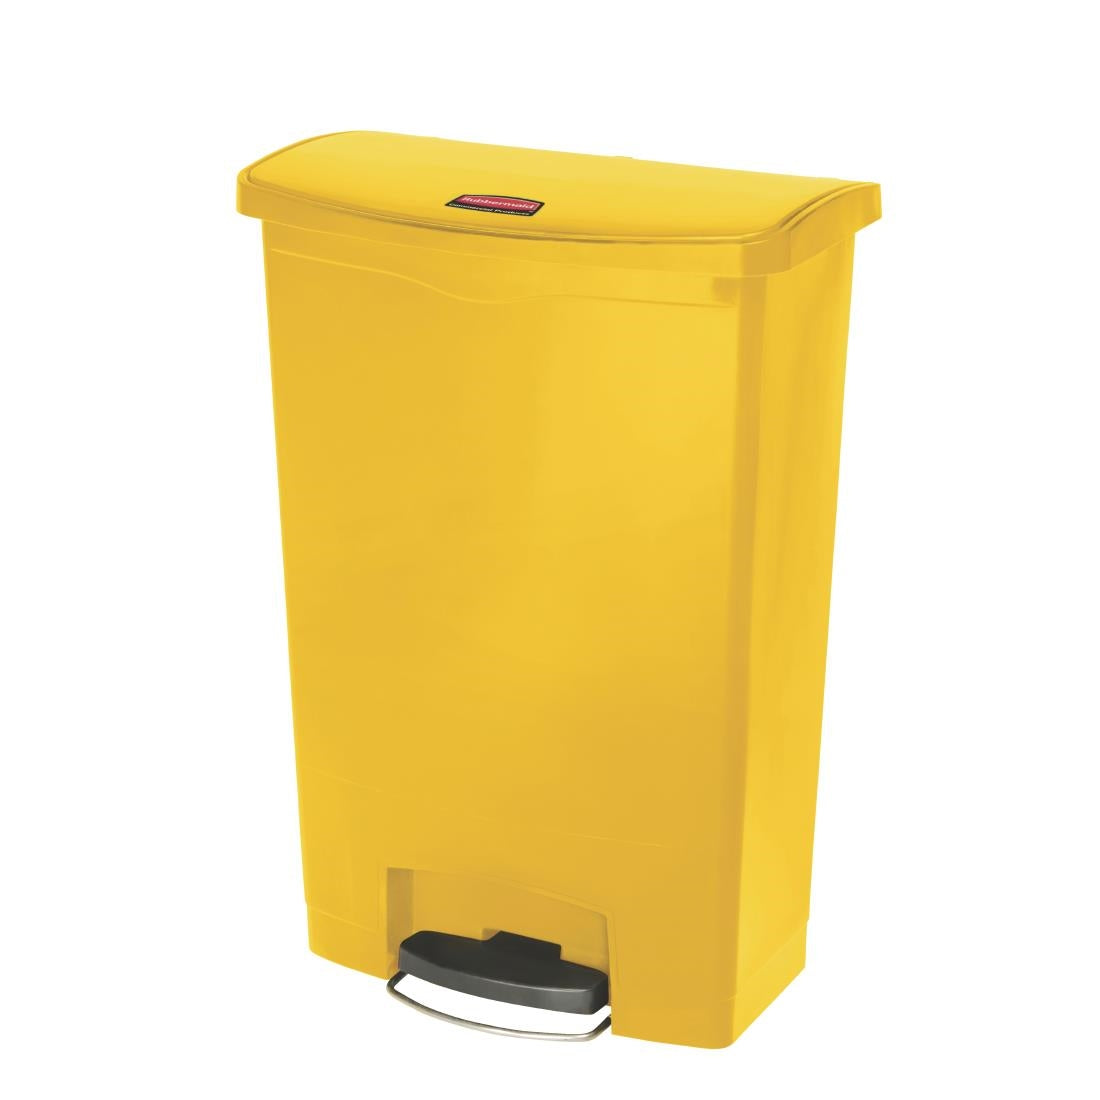 CW593 Rubbermaid Slim Jim Step on Bin Front Pedal 90Ltr Yellow JD Catering Equipment Solutions Ltd